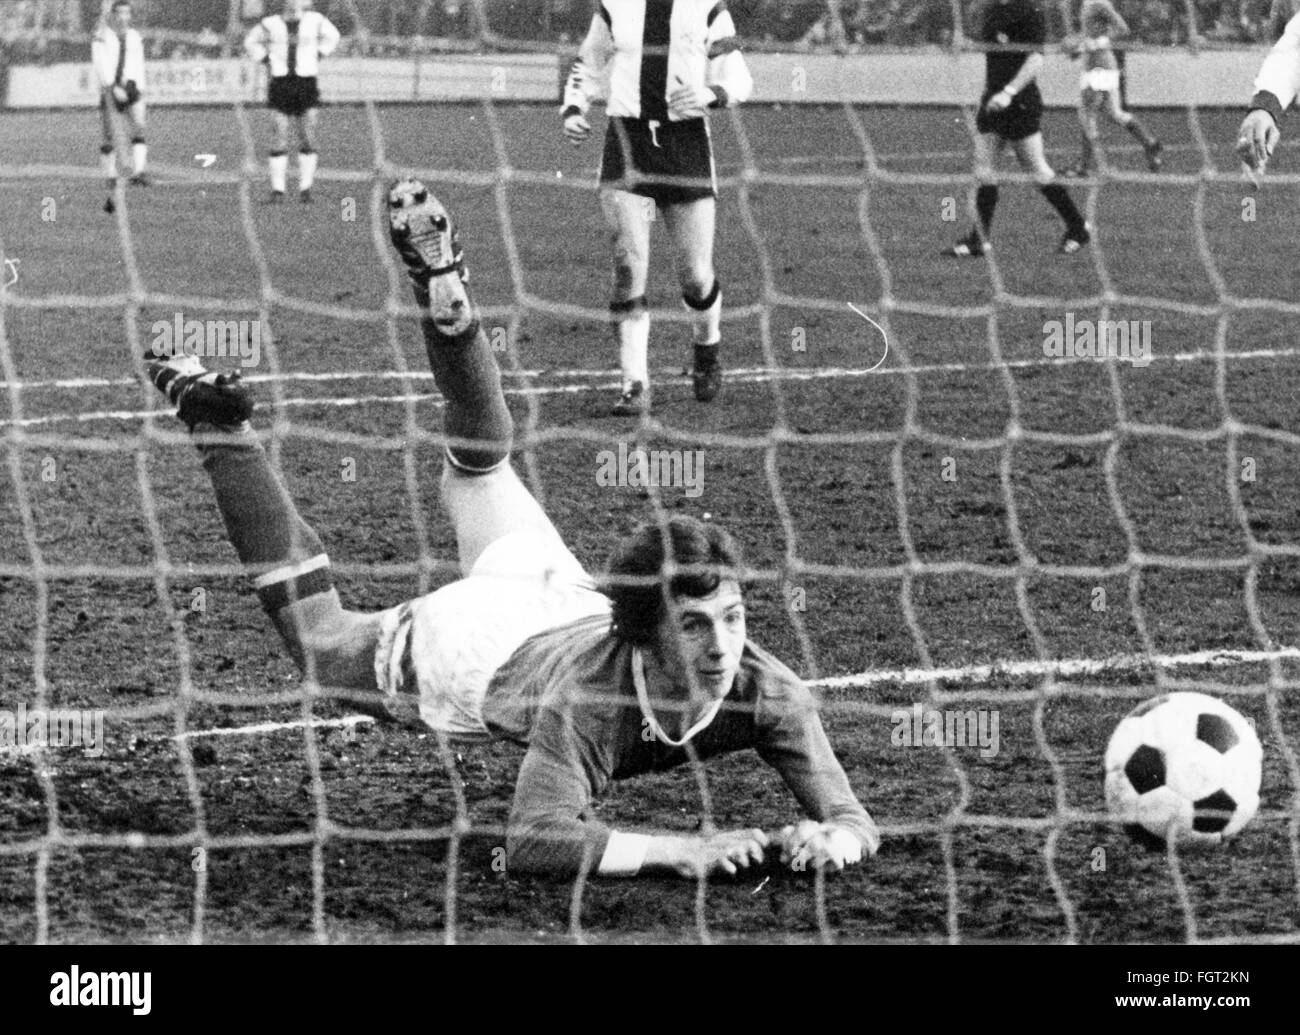 sports,football,games,Germany,DFB-Pokal,1970 / 1971,second round,game FC Schalke 04 versus VfR Heilbronn(4:0),Glückaufkampfbahn,Gelsenkirchen,20.2.1971,goal for the 2:0 for Schalke by Klaus Fischer,DFB cup,football match,soccer match,football matches,footballer,footballers,kicker,football player,football players,ball,nets,goal net,Glückauf-kampfbahn,Glückauf kampfbahn,West Germany,Western Germany,Germany,1970s,70s,20th century,people,men,man,male,football,soccer,footballs,soccer balls,second round,round before the quart,Additional-Rights-Clearences-Not Available Stock Photo